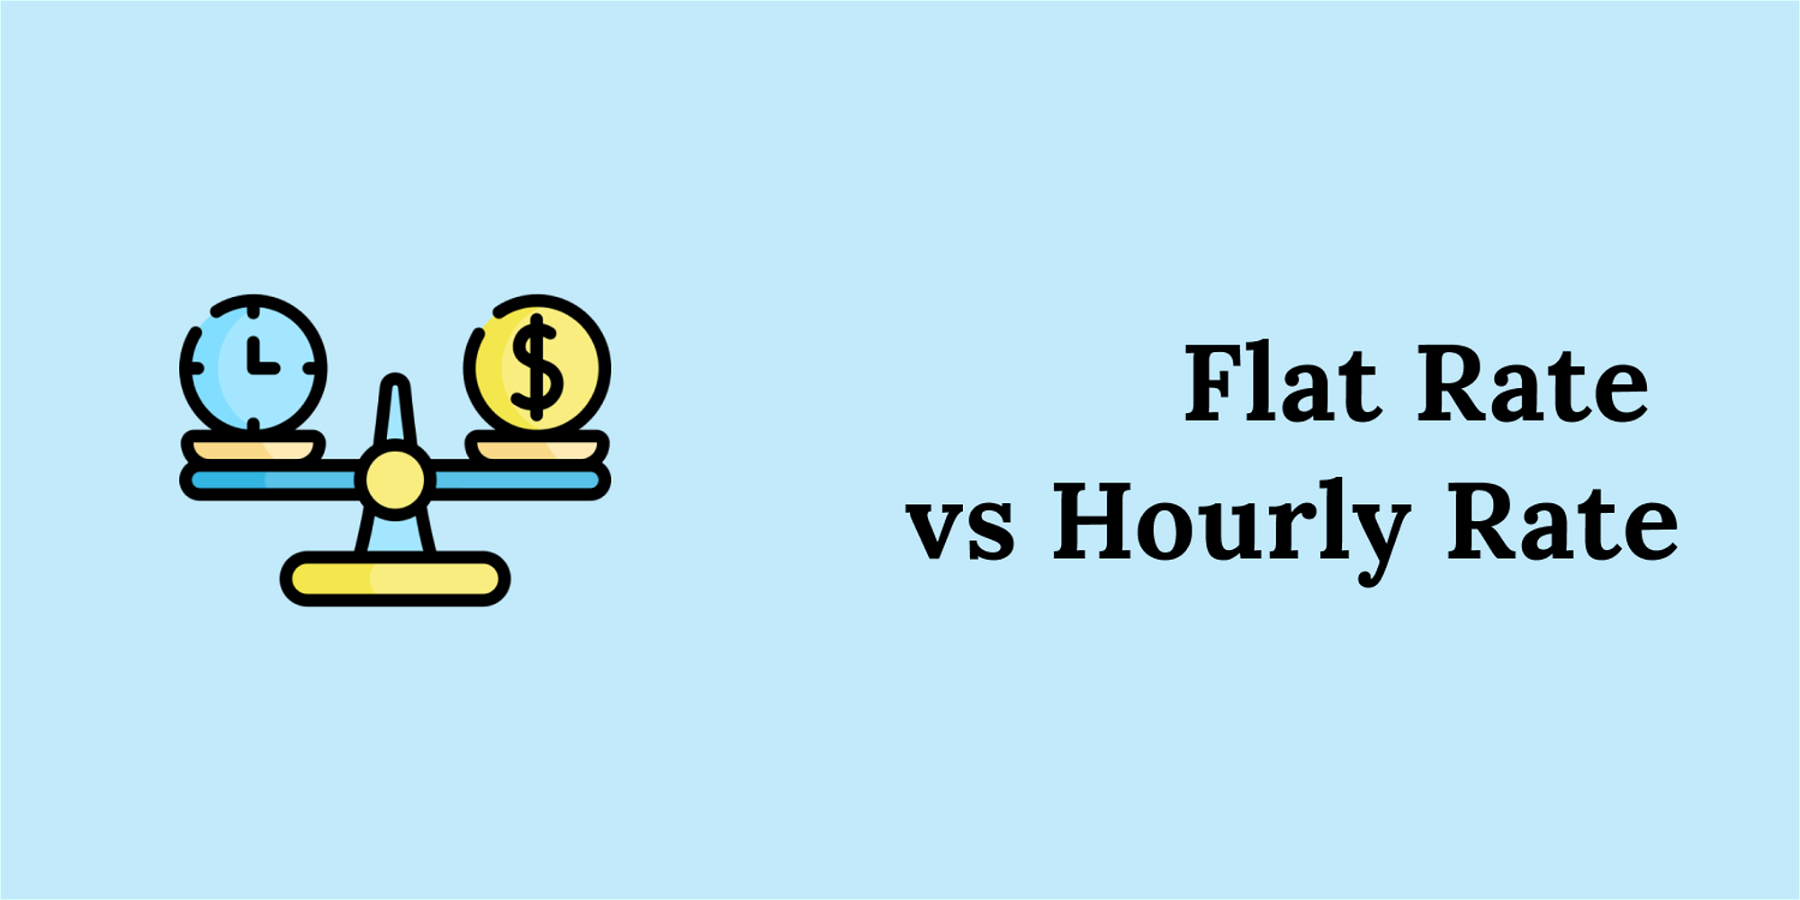 Flat rate vs hourly rate: what should you choose?